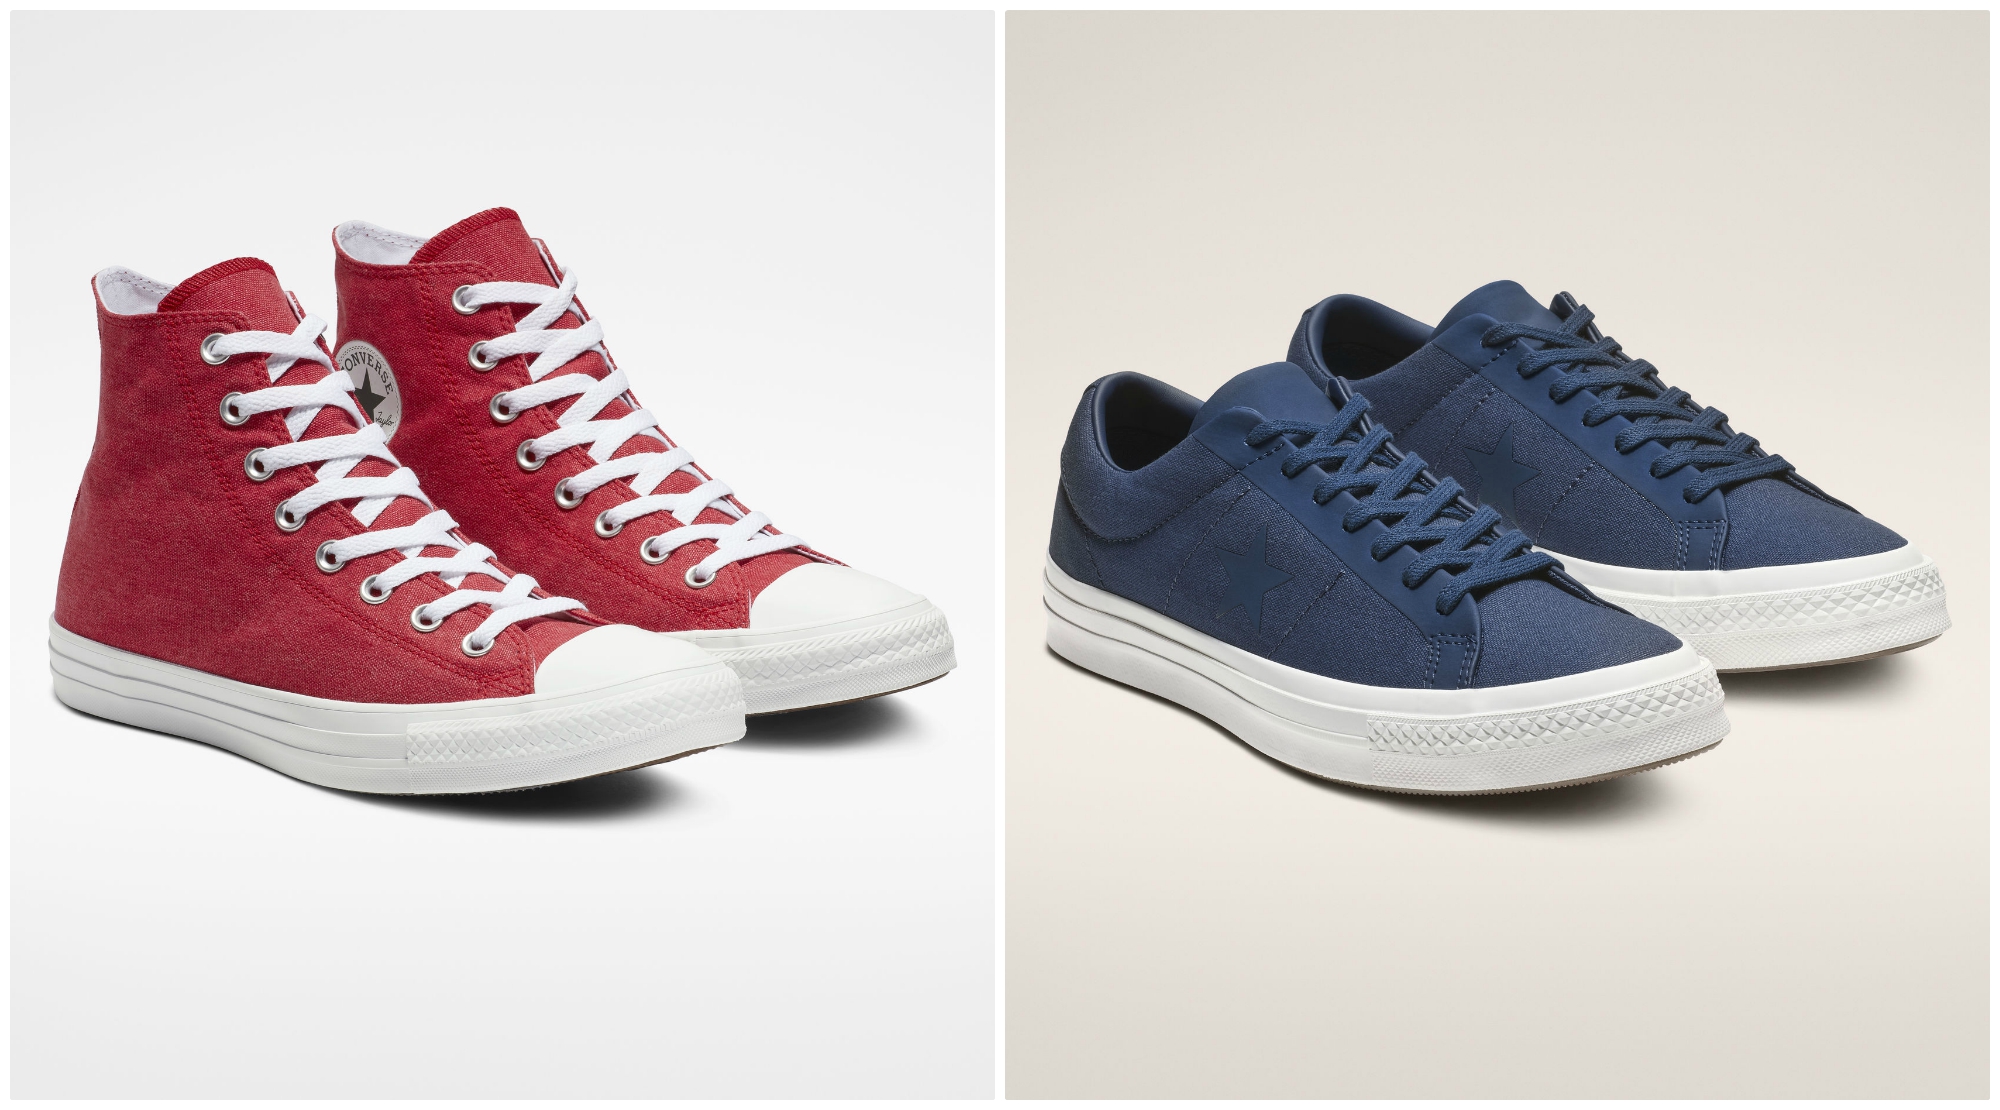 Converse Cut Prices On Over 100 Sneakers To Just $25 - Maxim